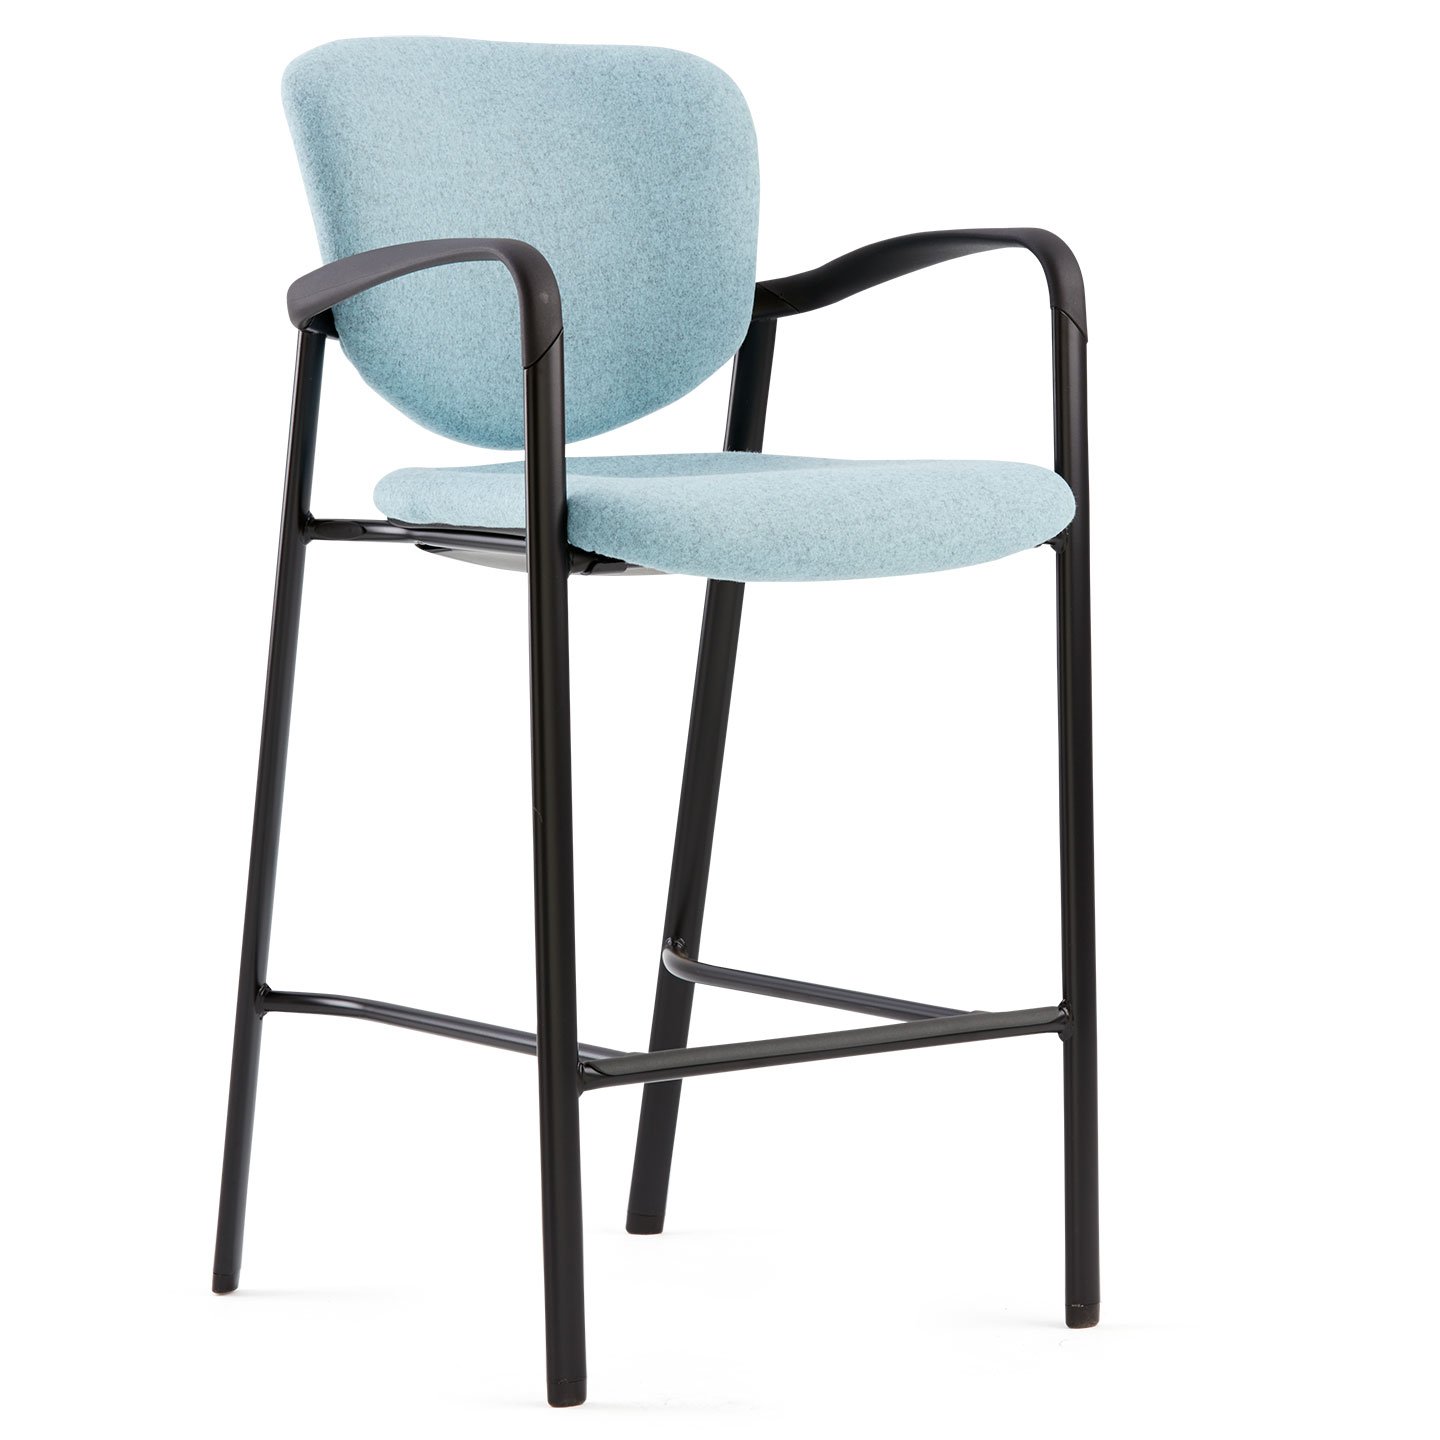 Haworth Improv stool in light blue upholstery and metal legs